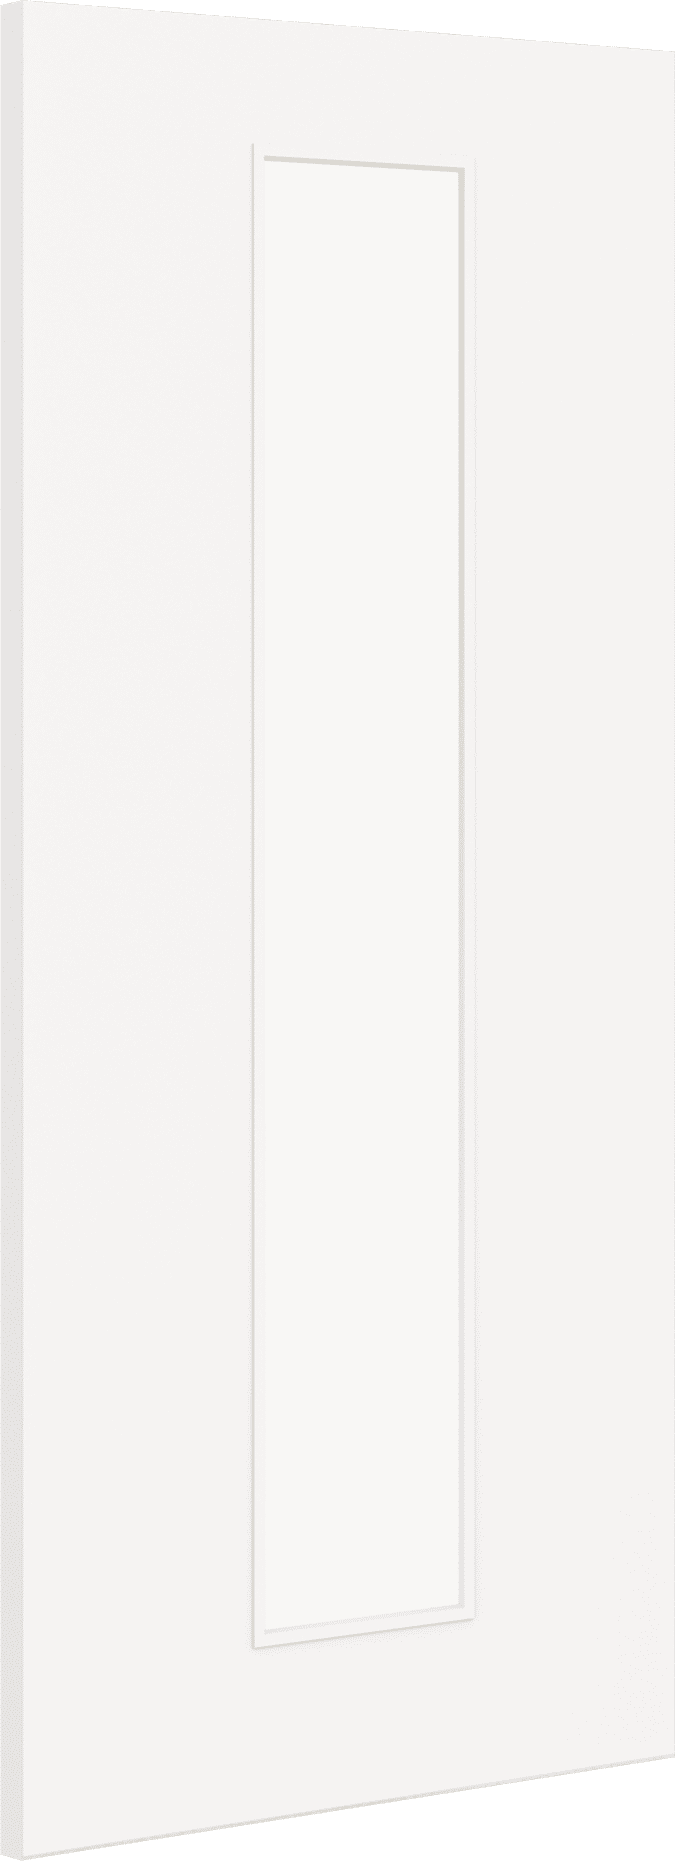 1981mm x 762mm x 44mm (30") Architectural Paint Grade White 10 Clear Glazed Fire Door Blank